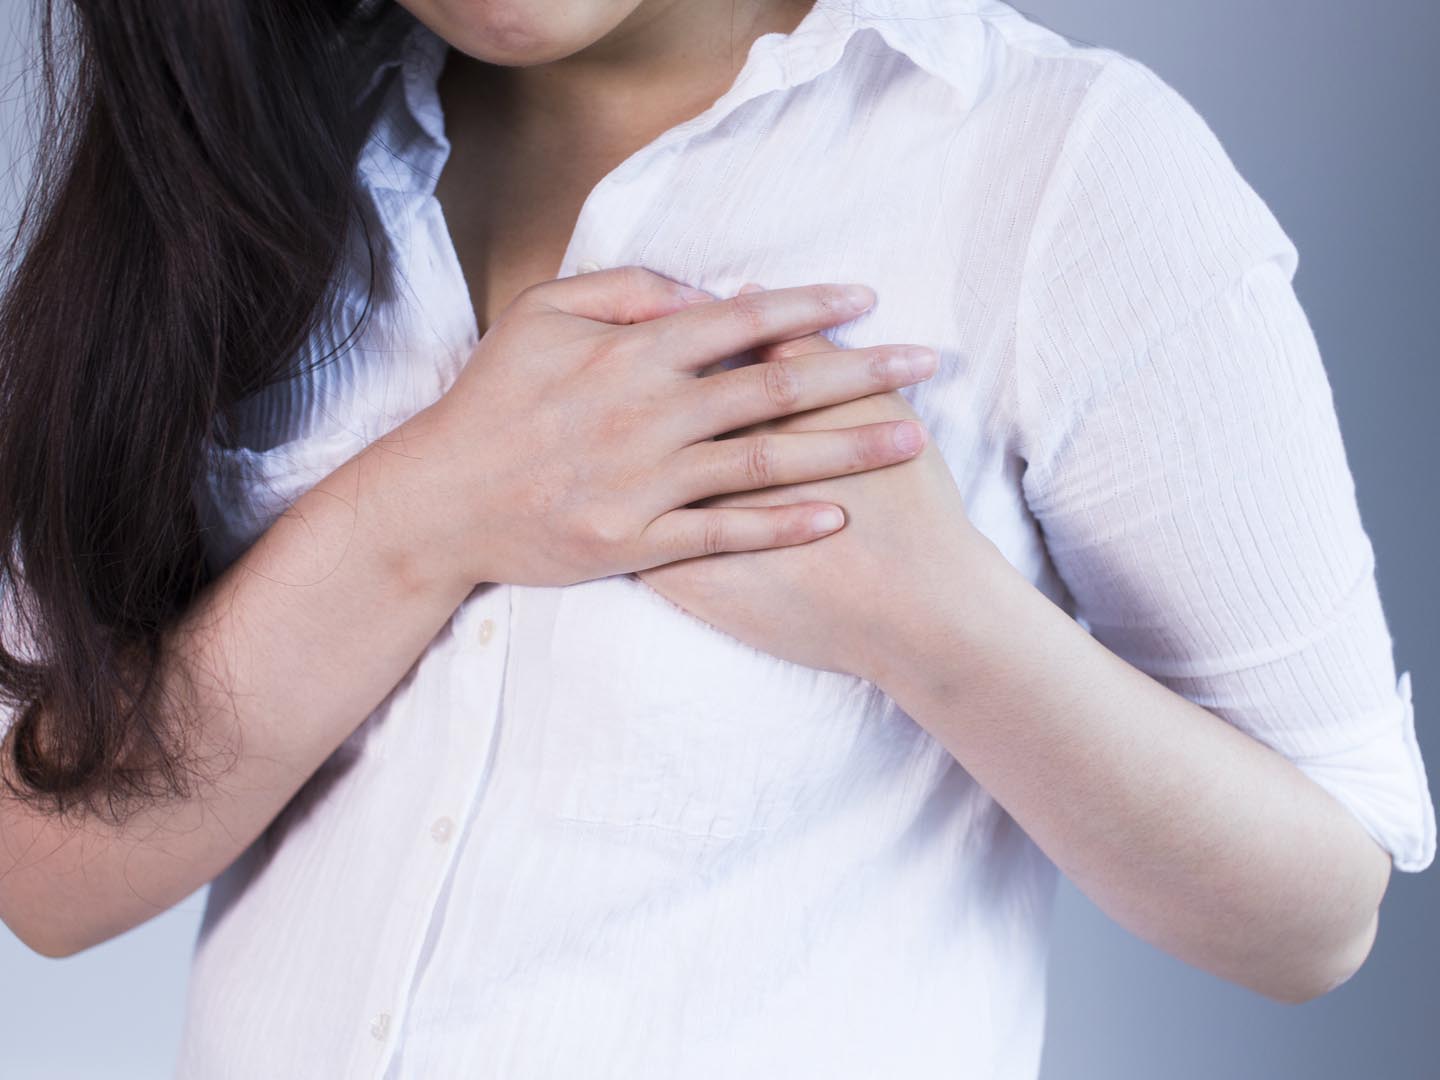 Woman has Chest Pain